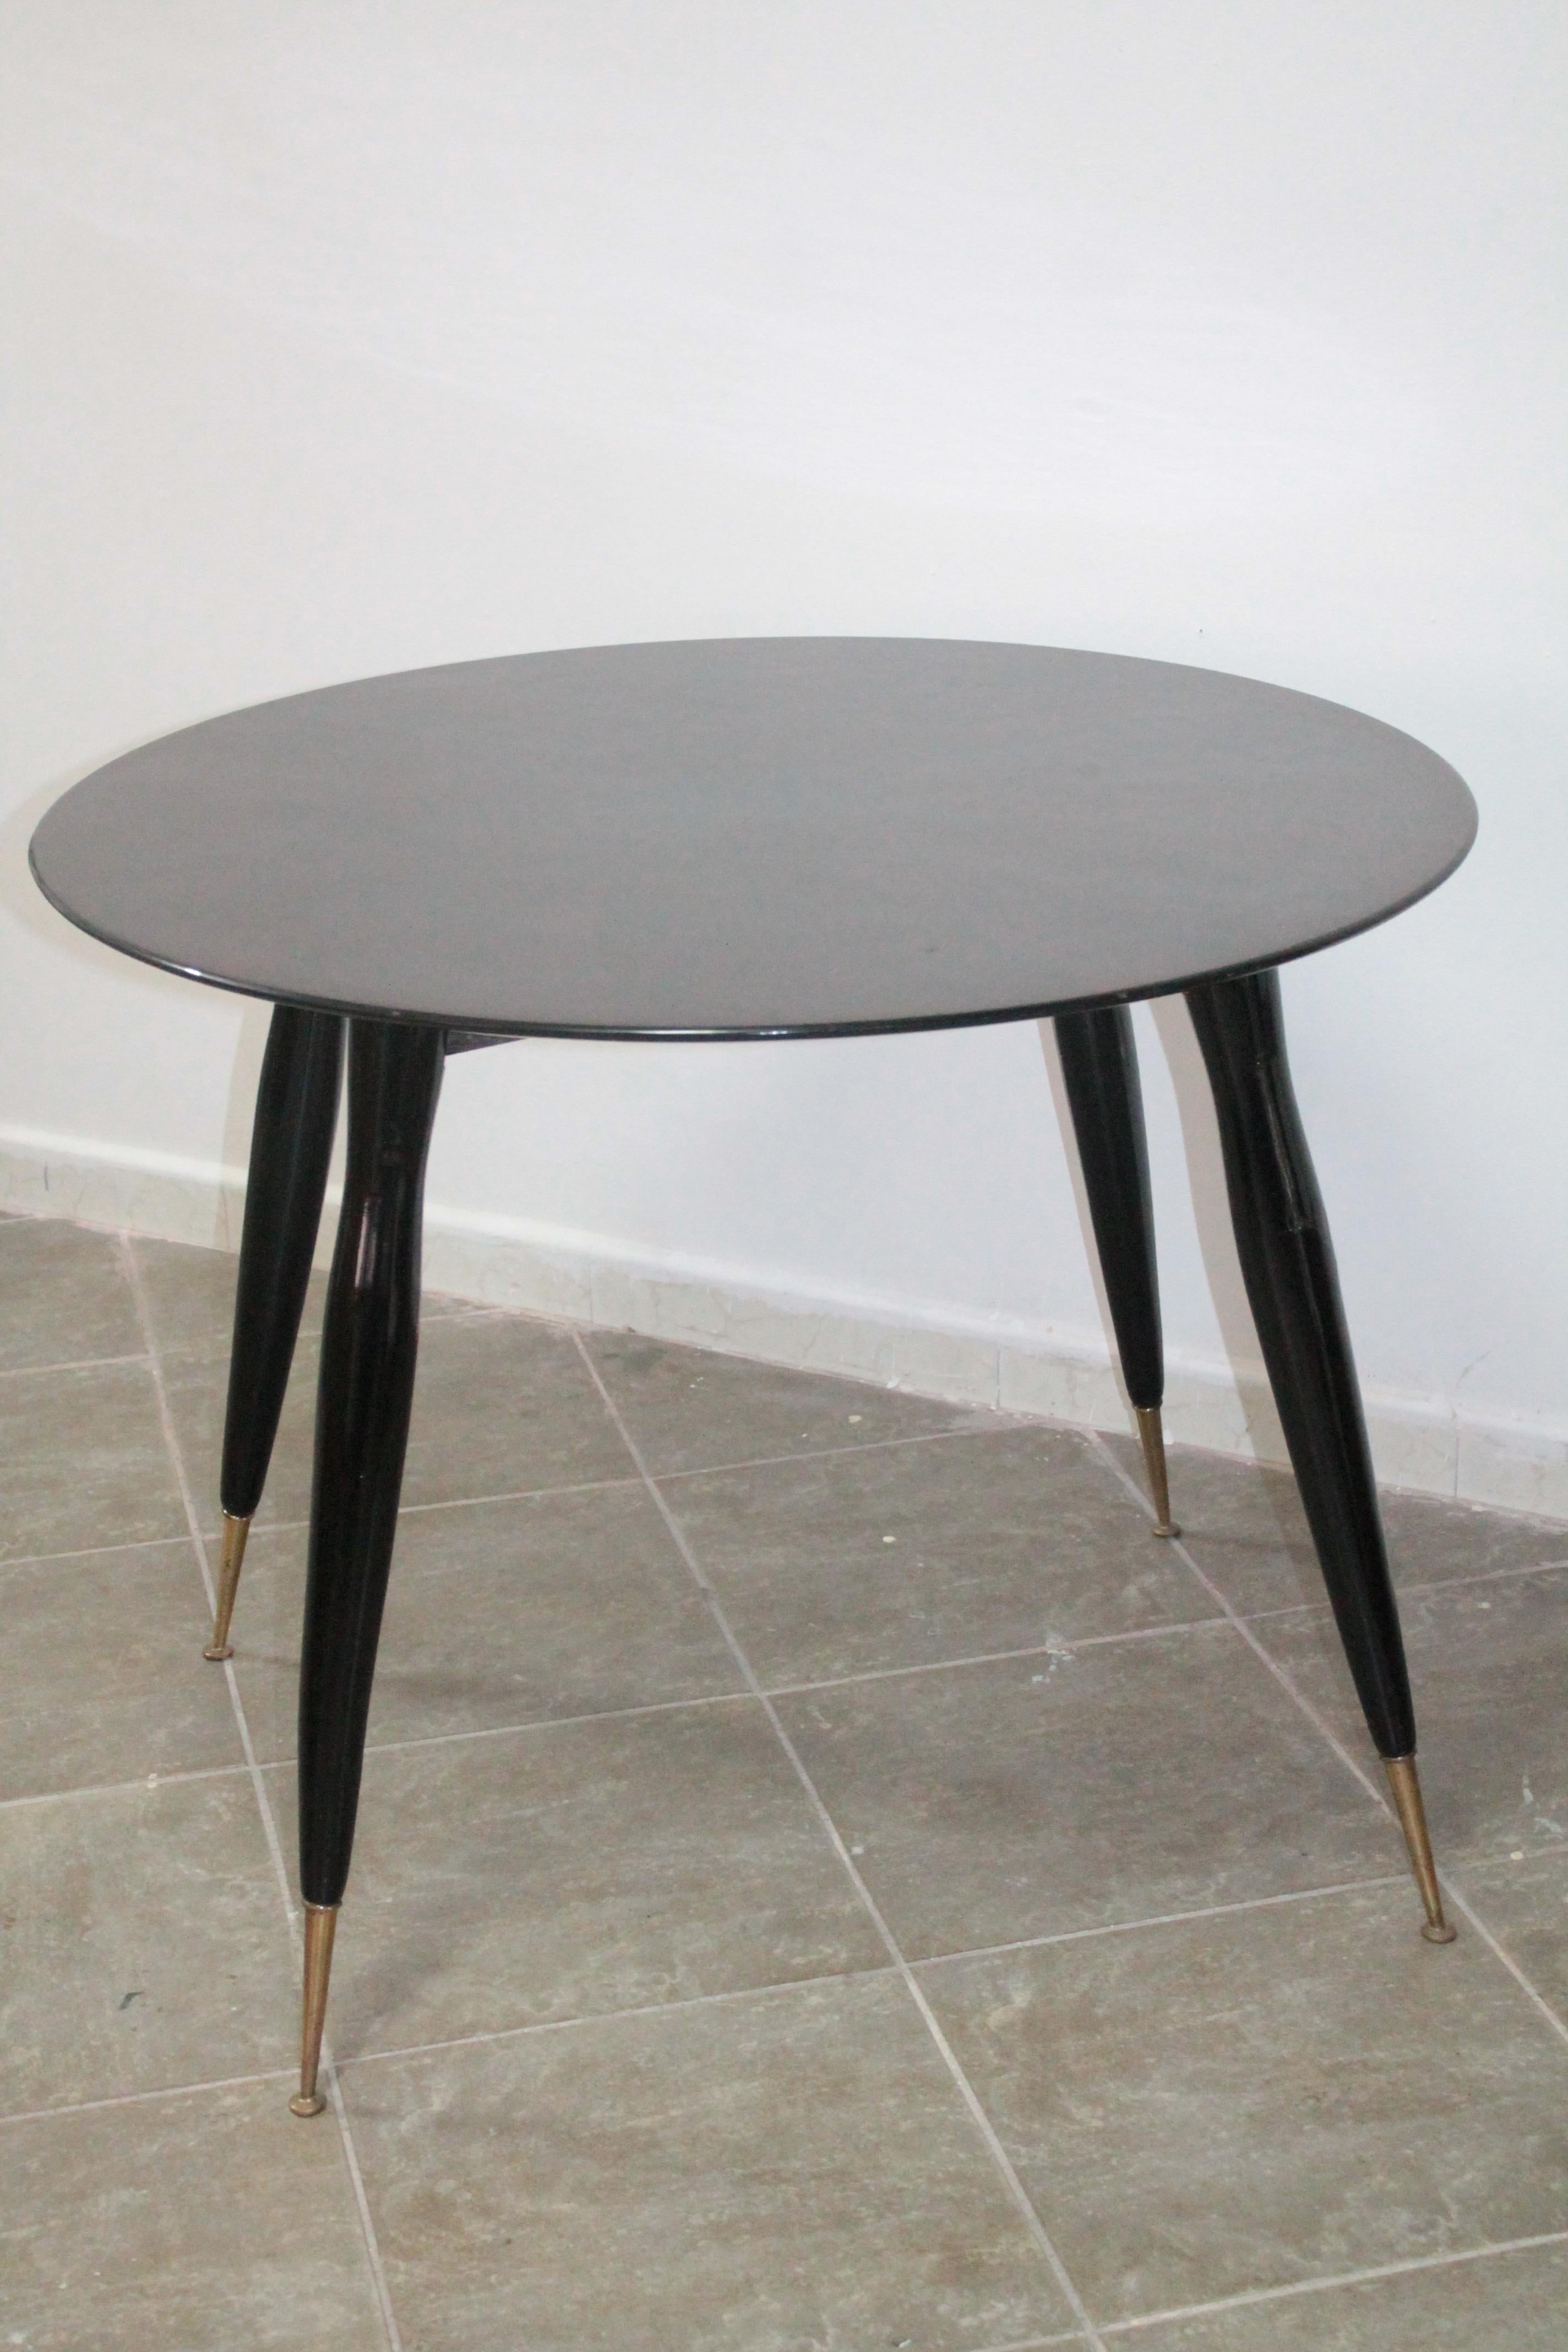 Italian Round Dining Table Rosewood in the Style of Gio Ponti, 1950s For Sale 1